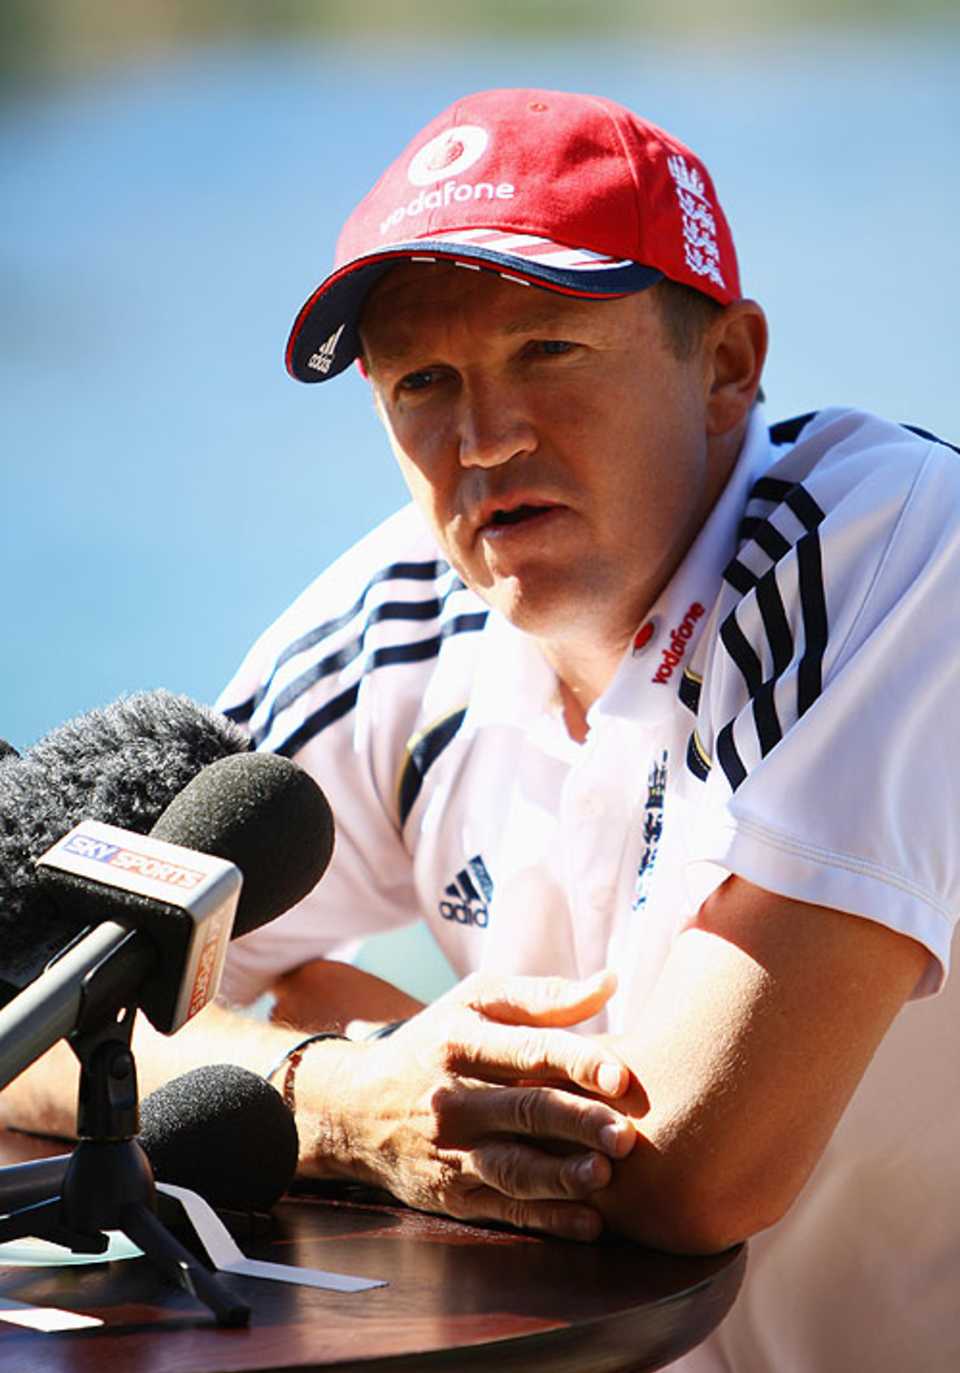 Andy Flower speaks to the media on the morning after England's escape at Newlands